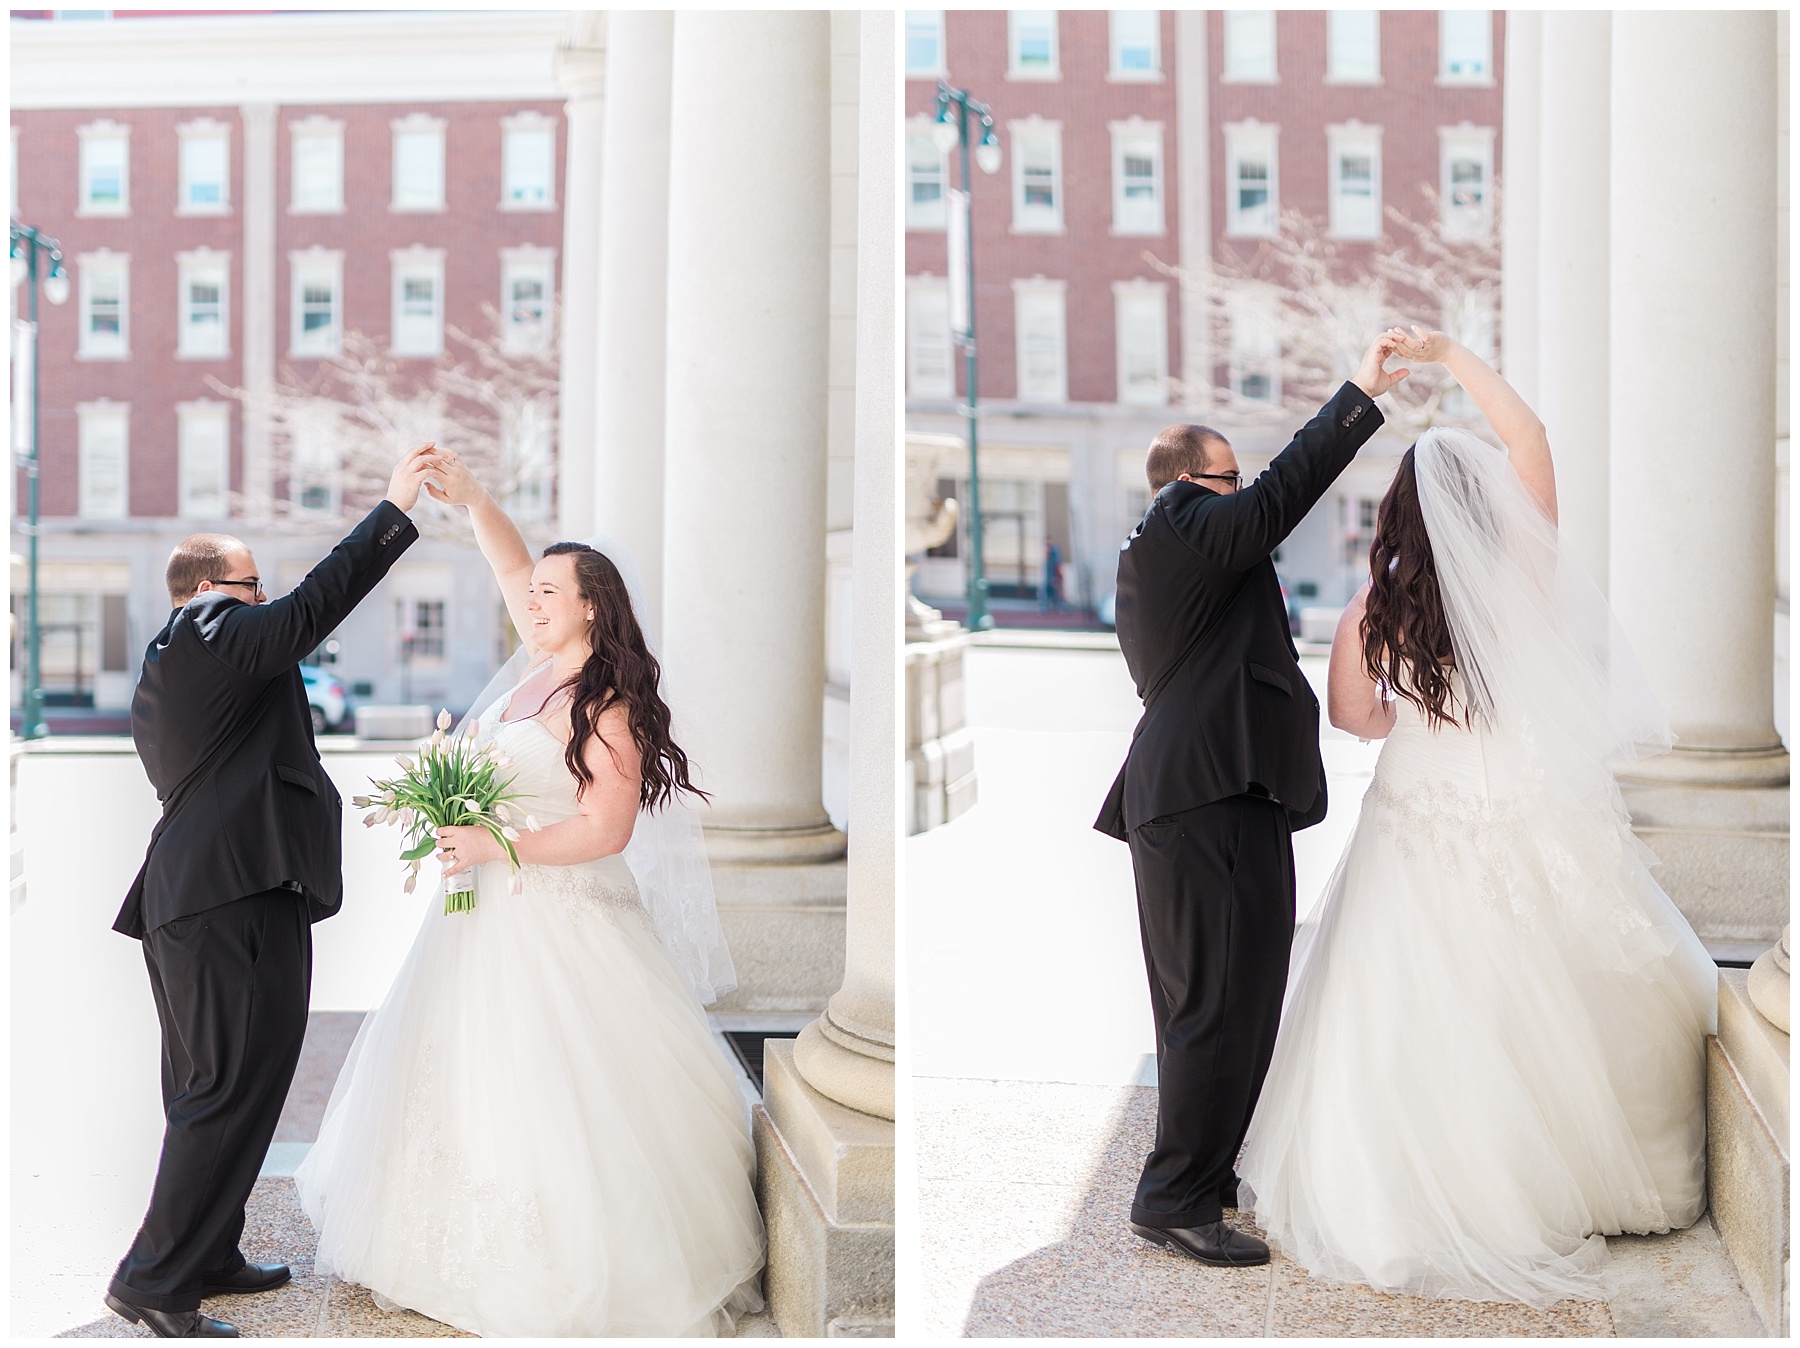 plus size couple in wedding attire taking wedding photos in downtown portland maine at city hall dancing holding tulips